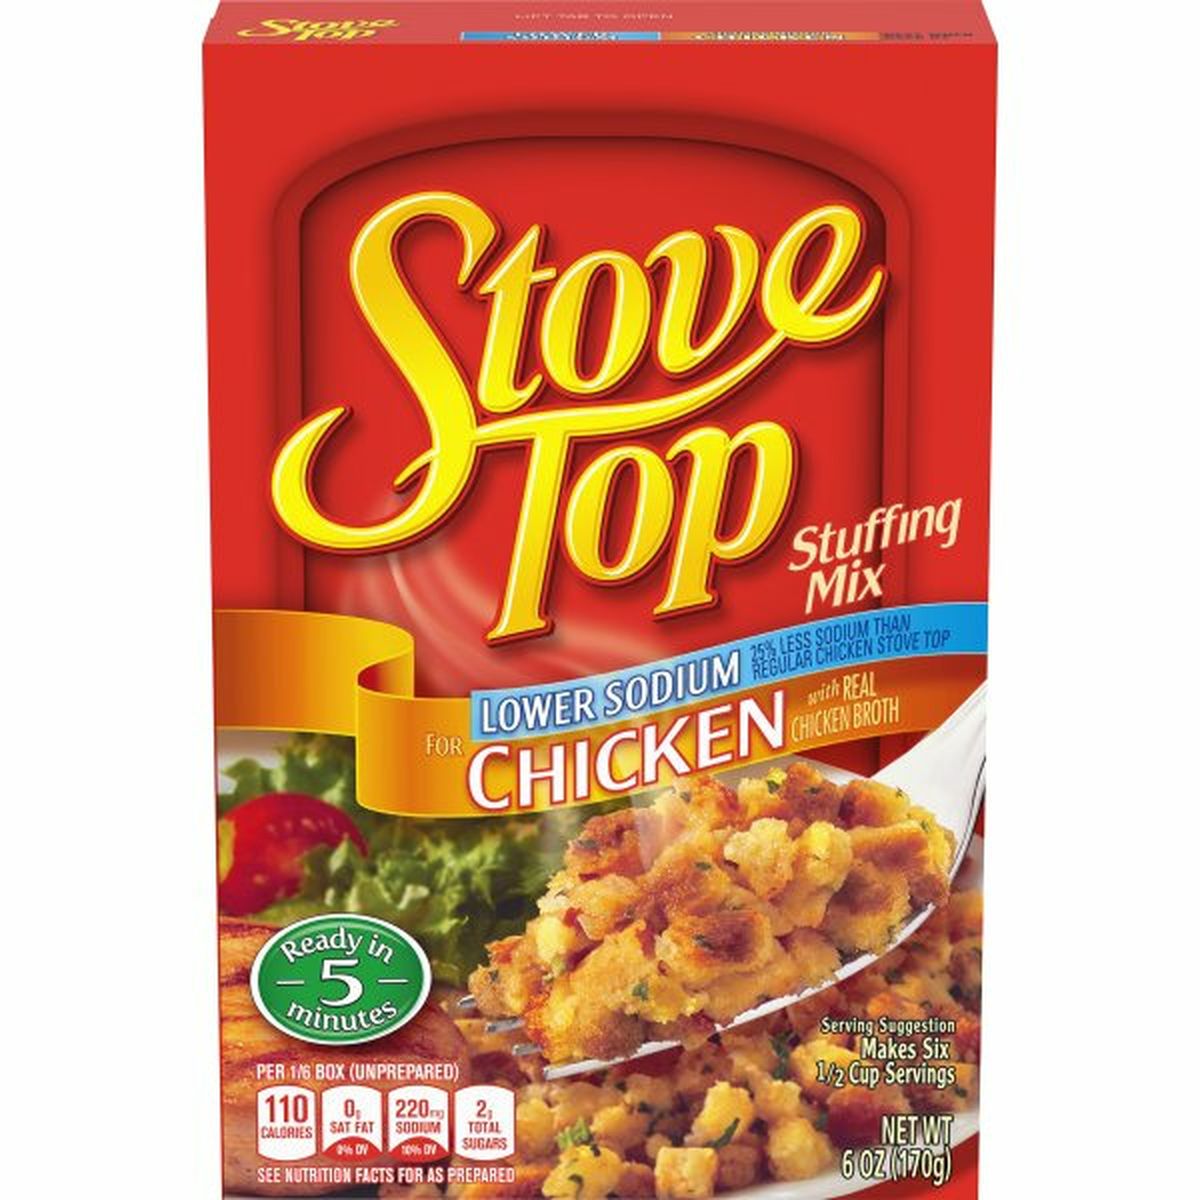 Calories in Kraft Stove Top Low-Sodium Chicken Stuffing Mix